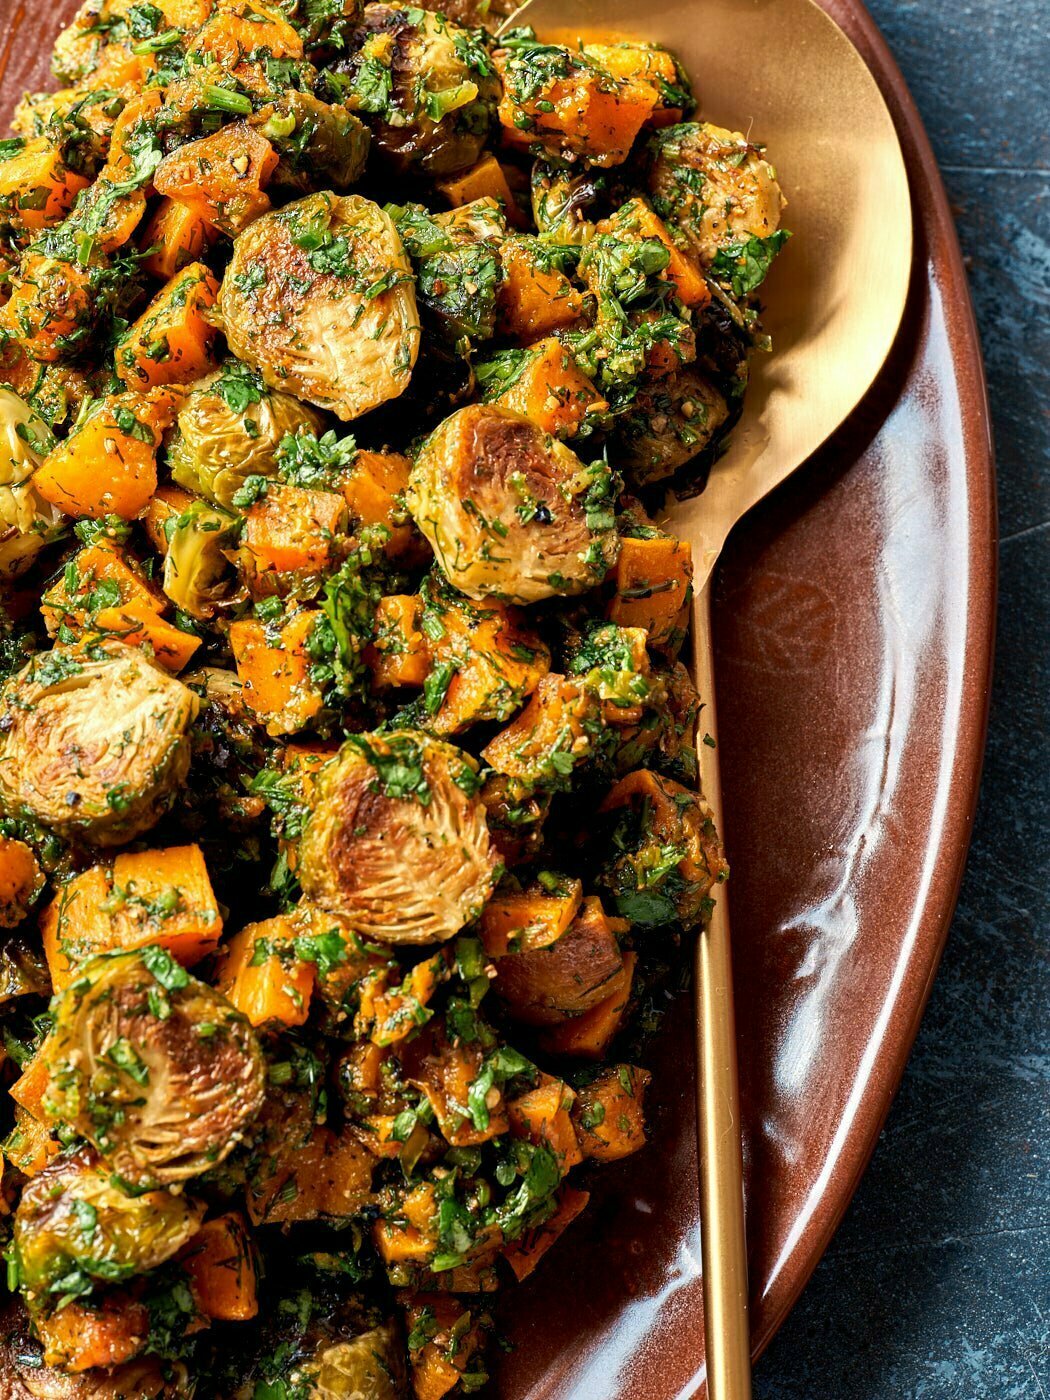 Crispy brussel sprouts and butternut squash topped with parsley sitting on a red platter.